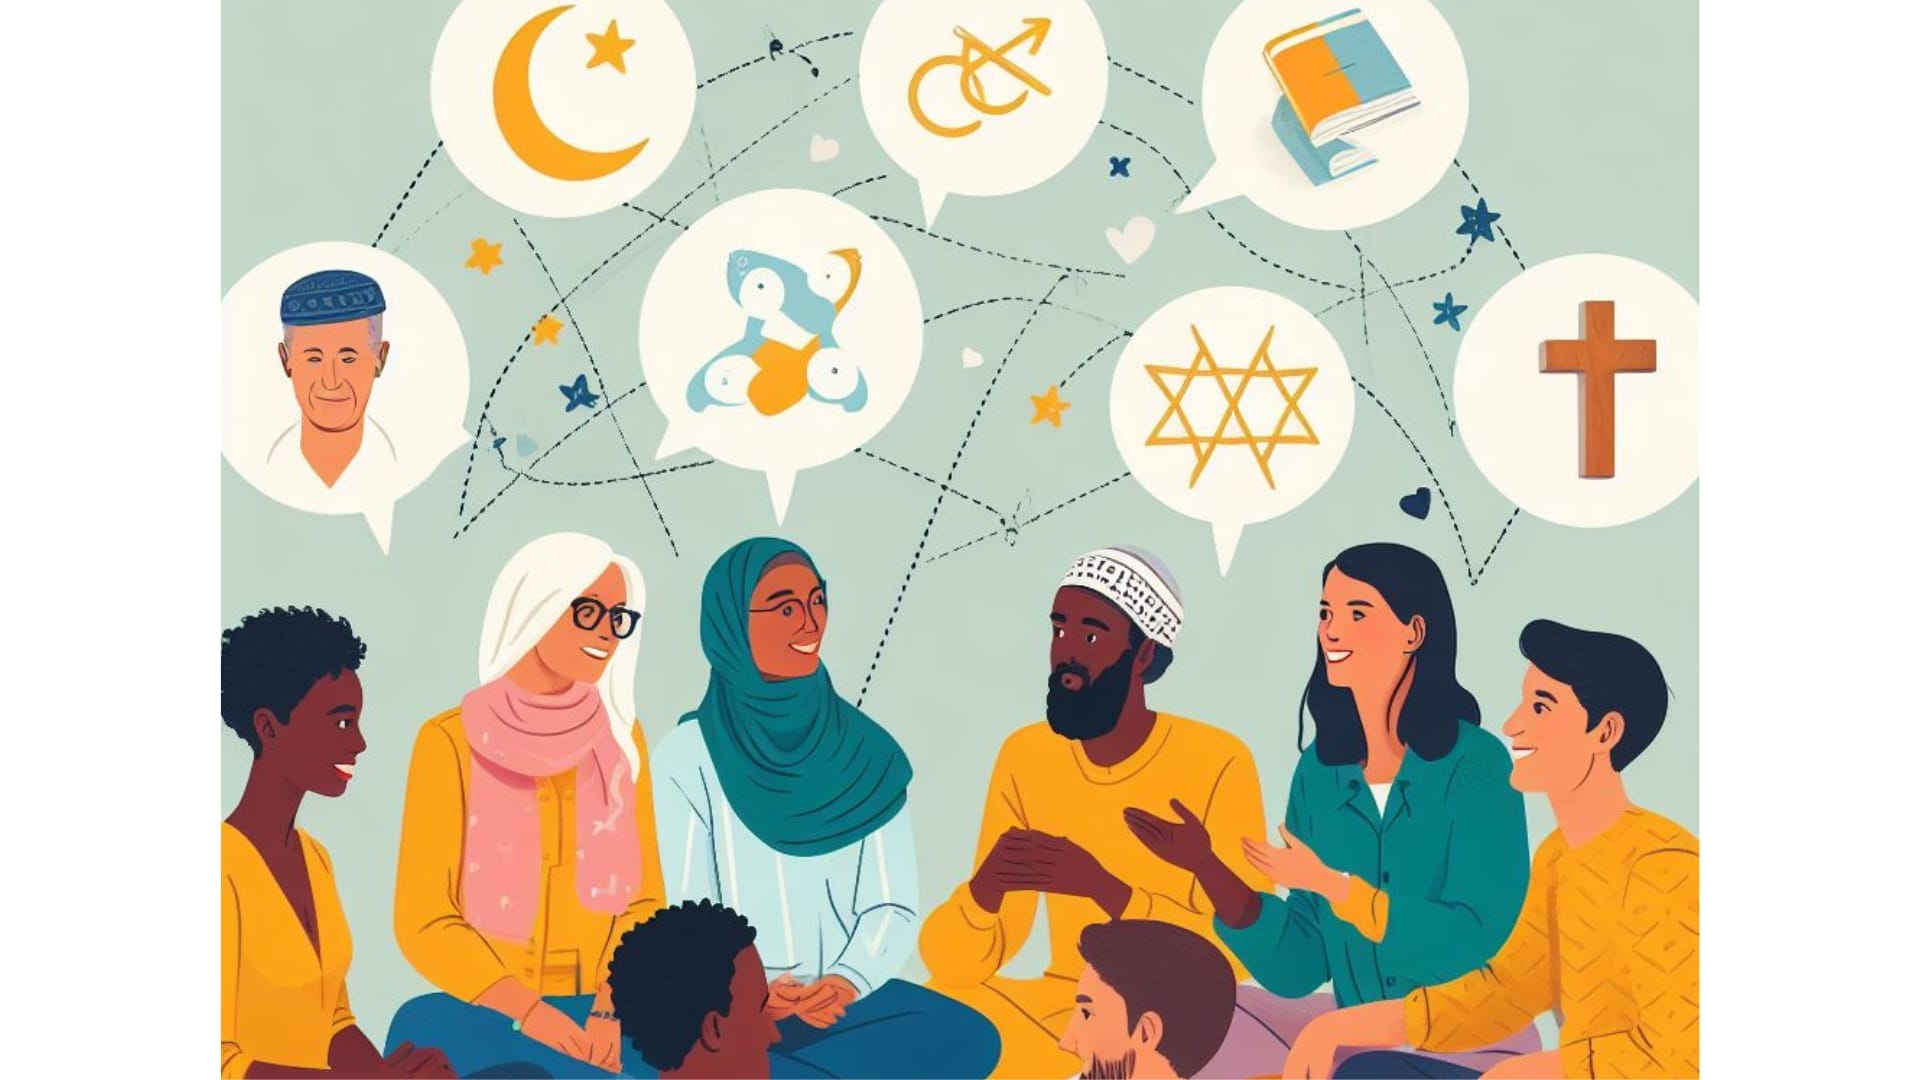 A diverse group of individuals engaged in a respectful conversation, showcasing harmonious exchange of ideas despite religious differences. People of various ethnicities and backgrounds discussing what to say when someone pushes religion on you.